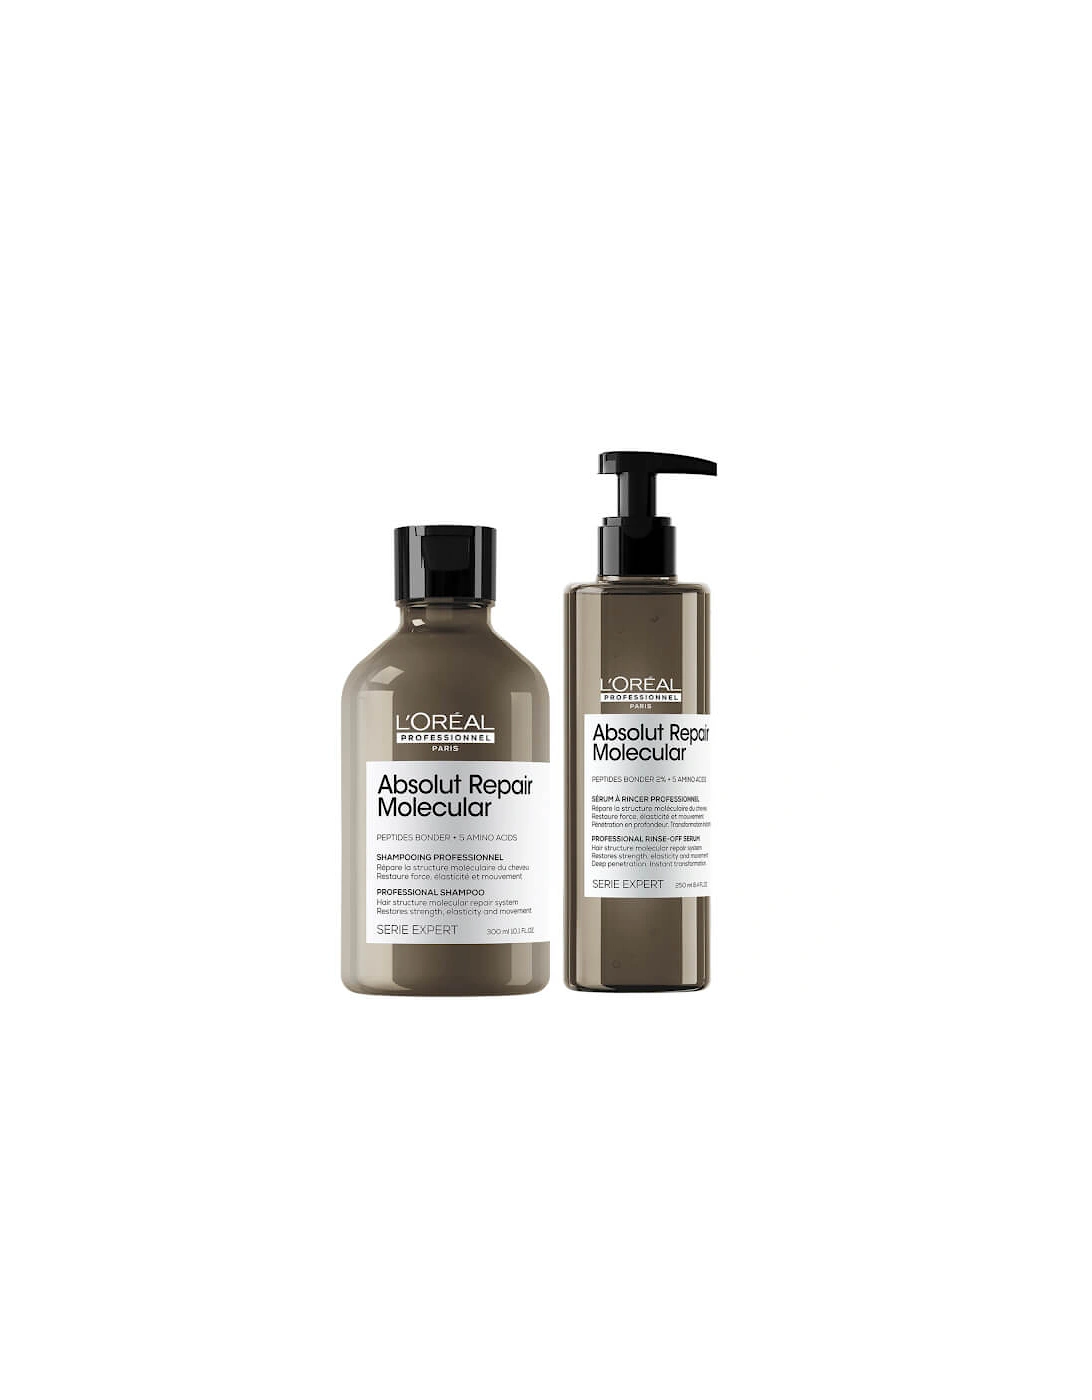 Professionnel Serie Expert Absolut Repair Molecular Shampoo and Rinse-off Serum Duo for Damaged Hair, 2 of 1